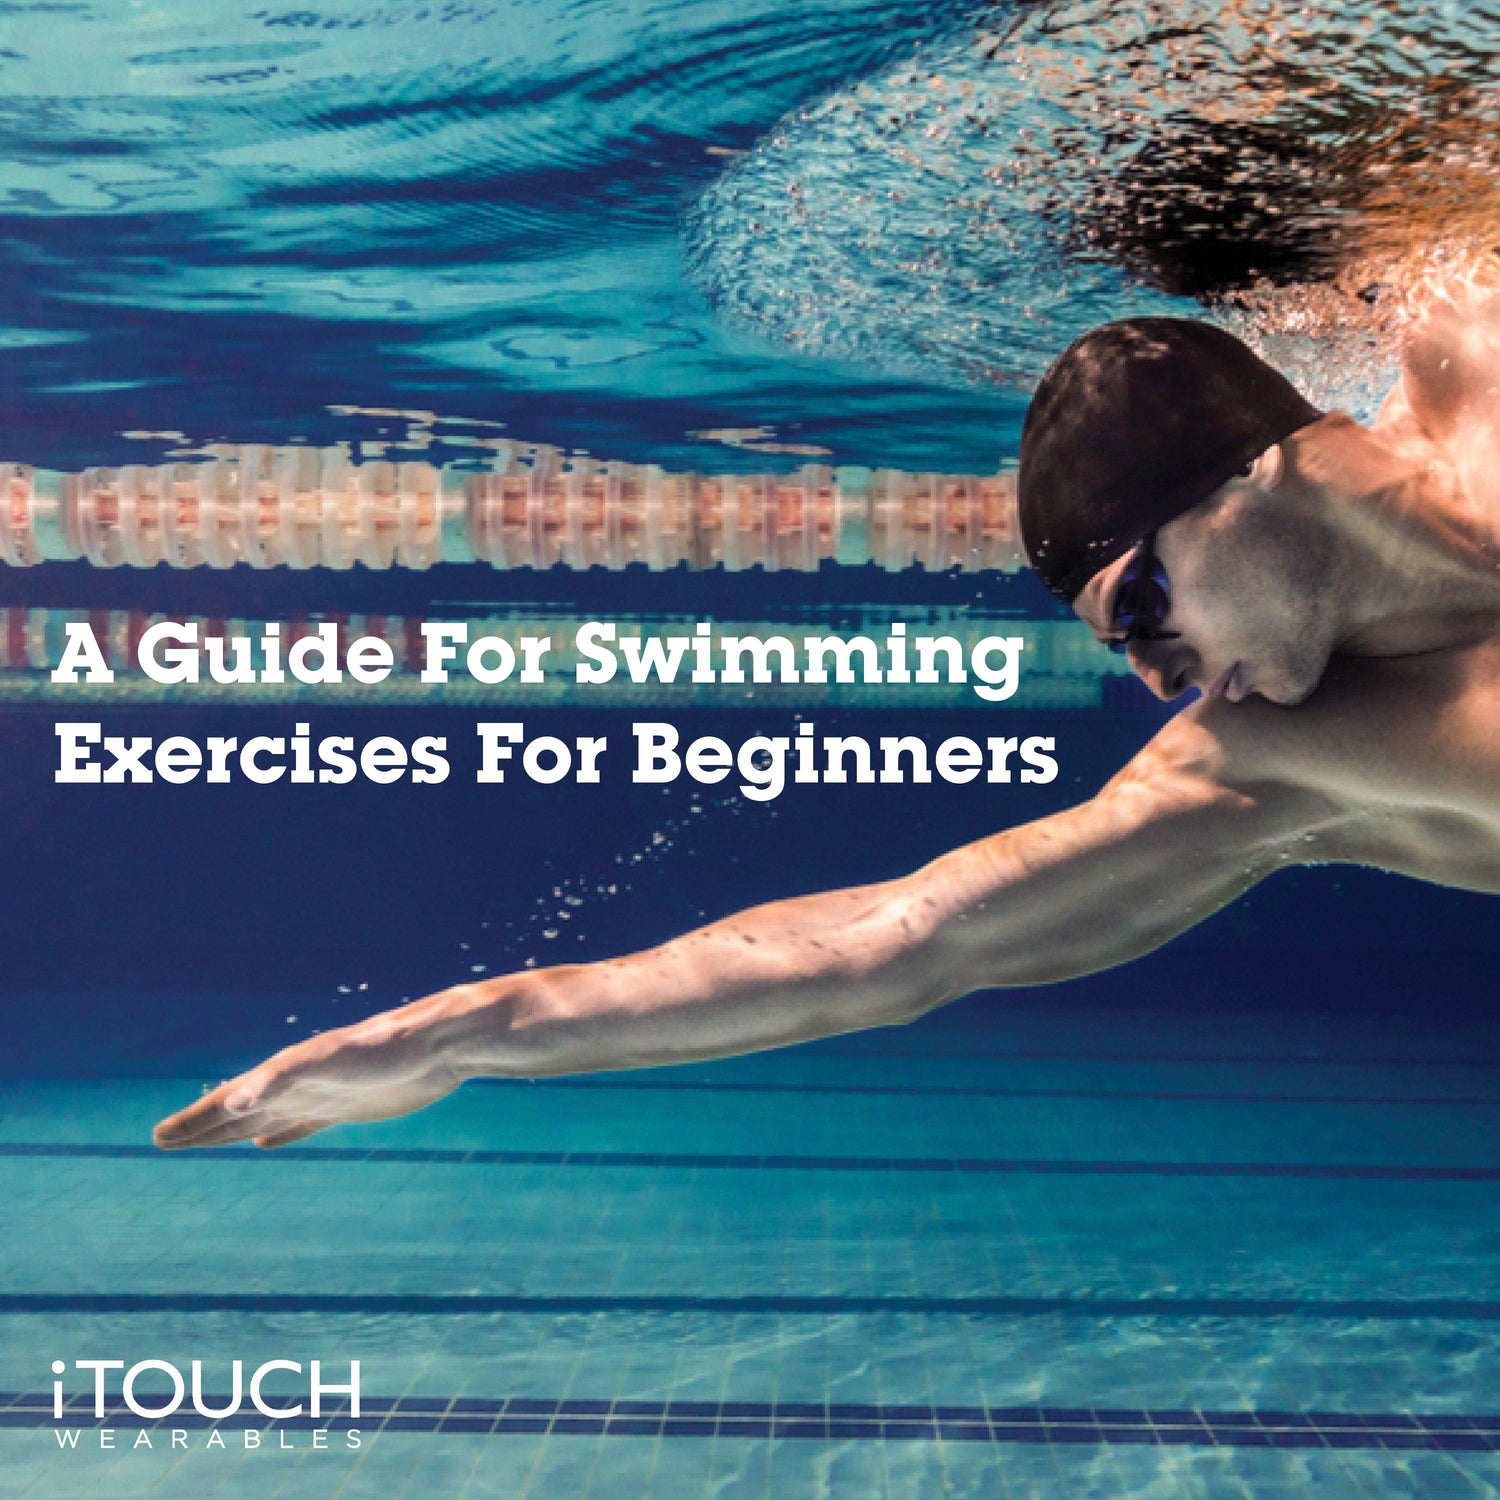 A Guide For Swimming Exercises For Beginners - iTOUCH Wearables